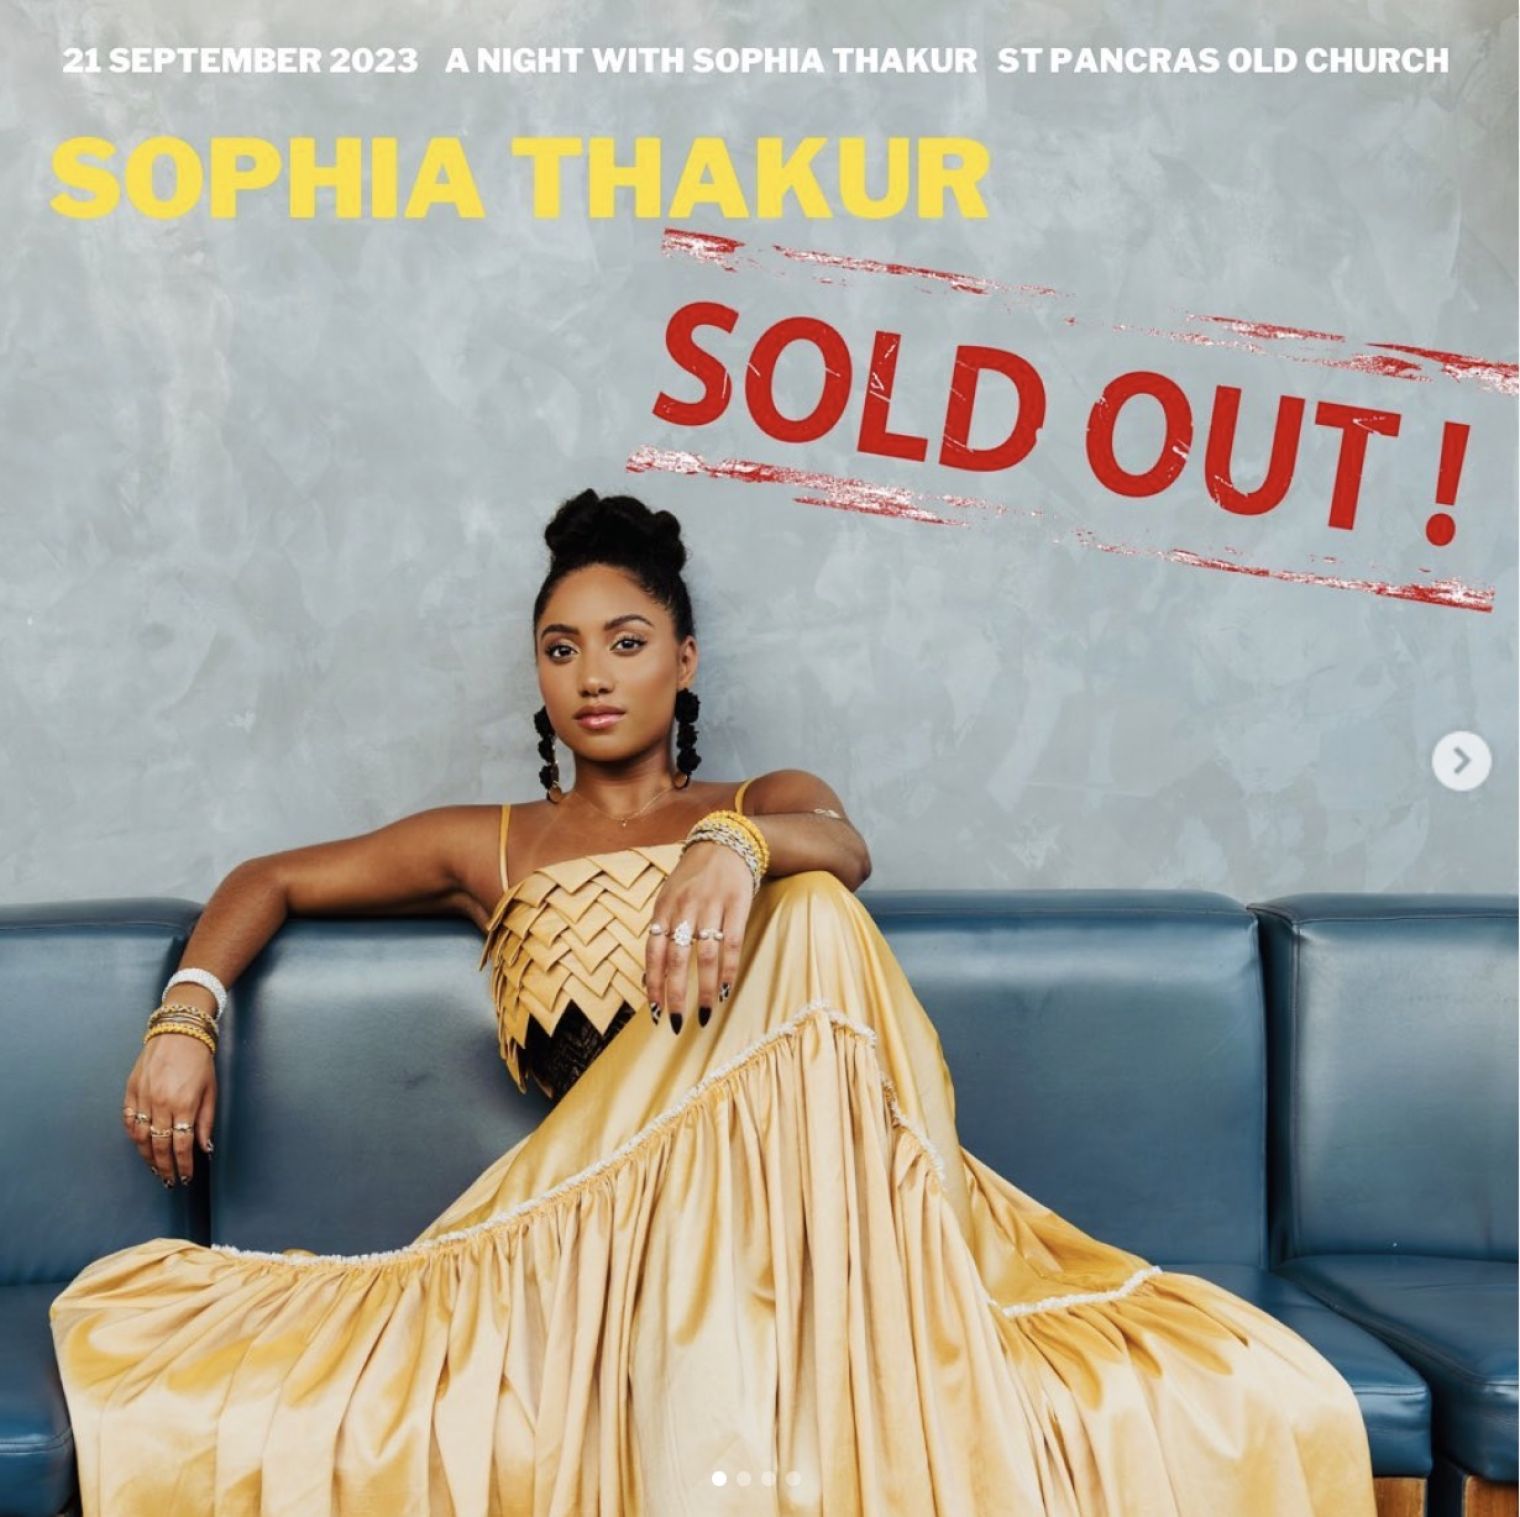 Sophia Thakur’s new London show has sold out an hour of going on sale yesterday